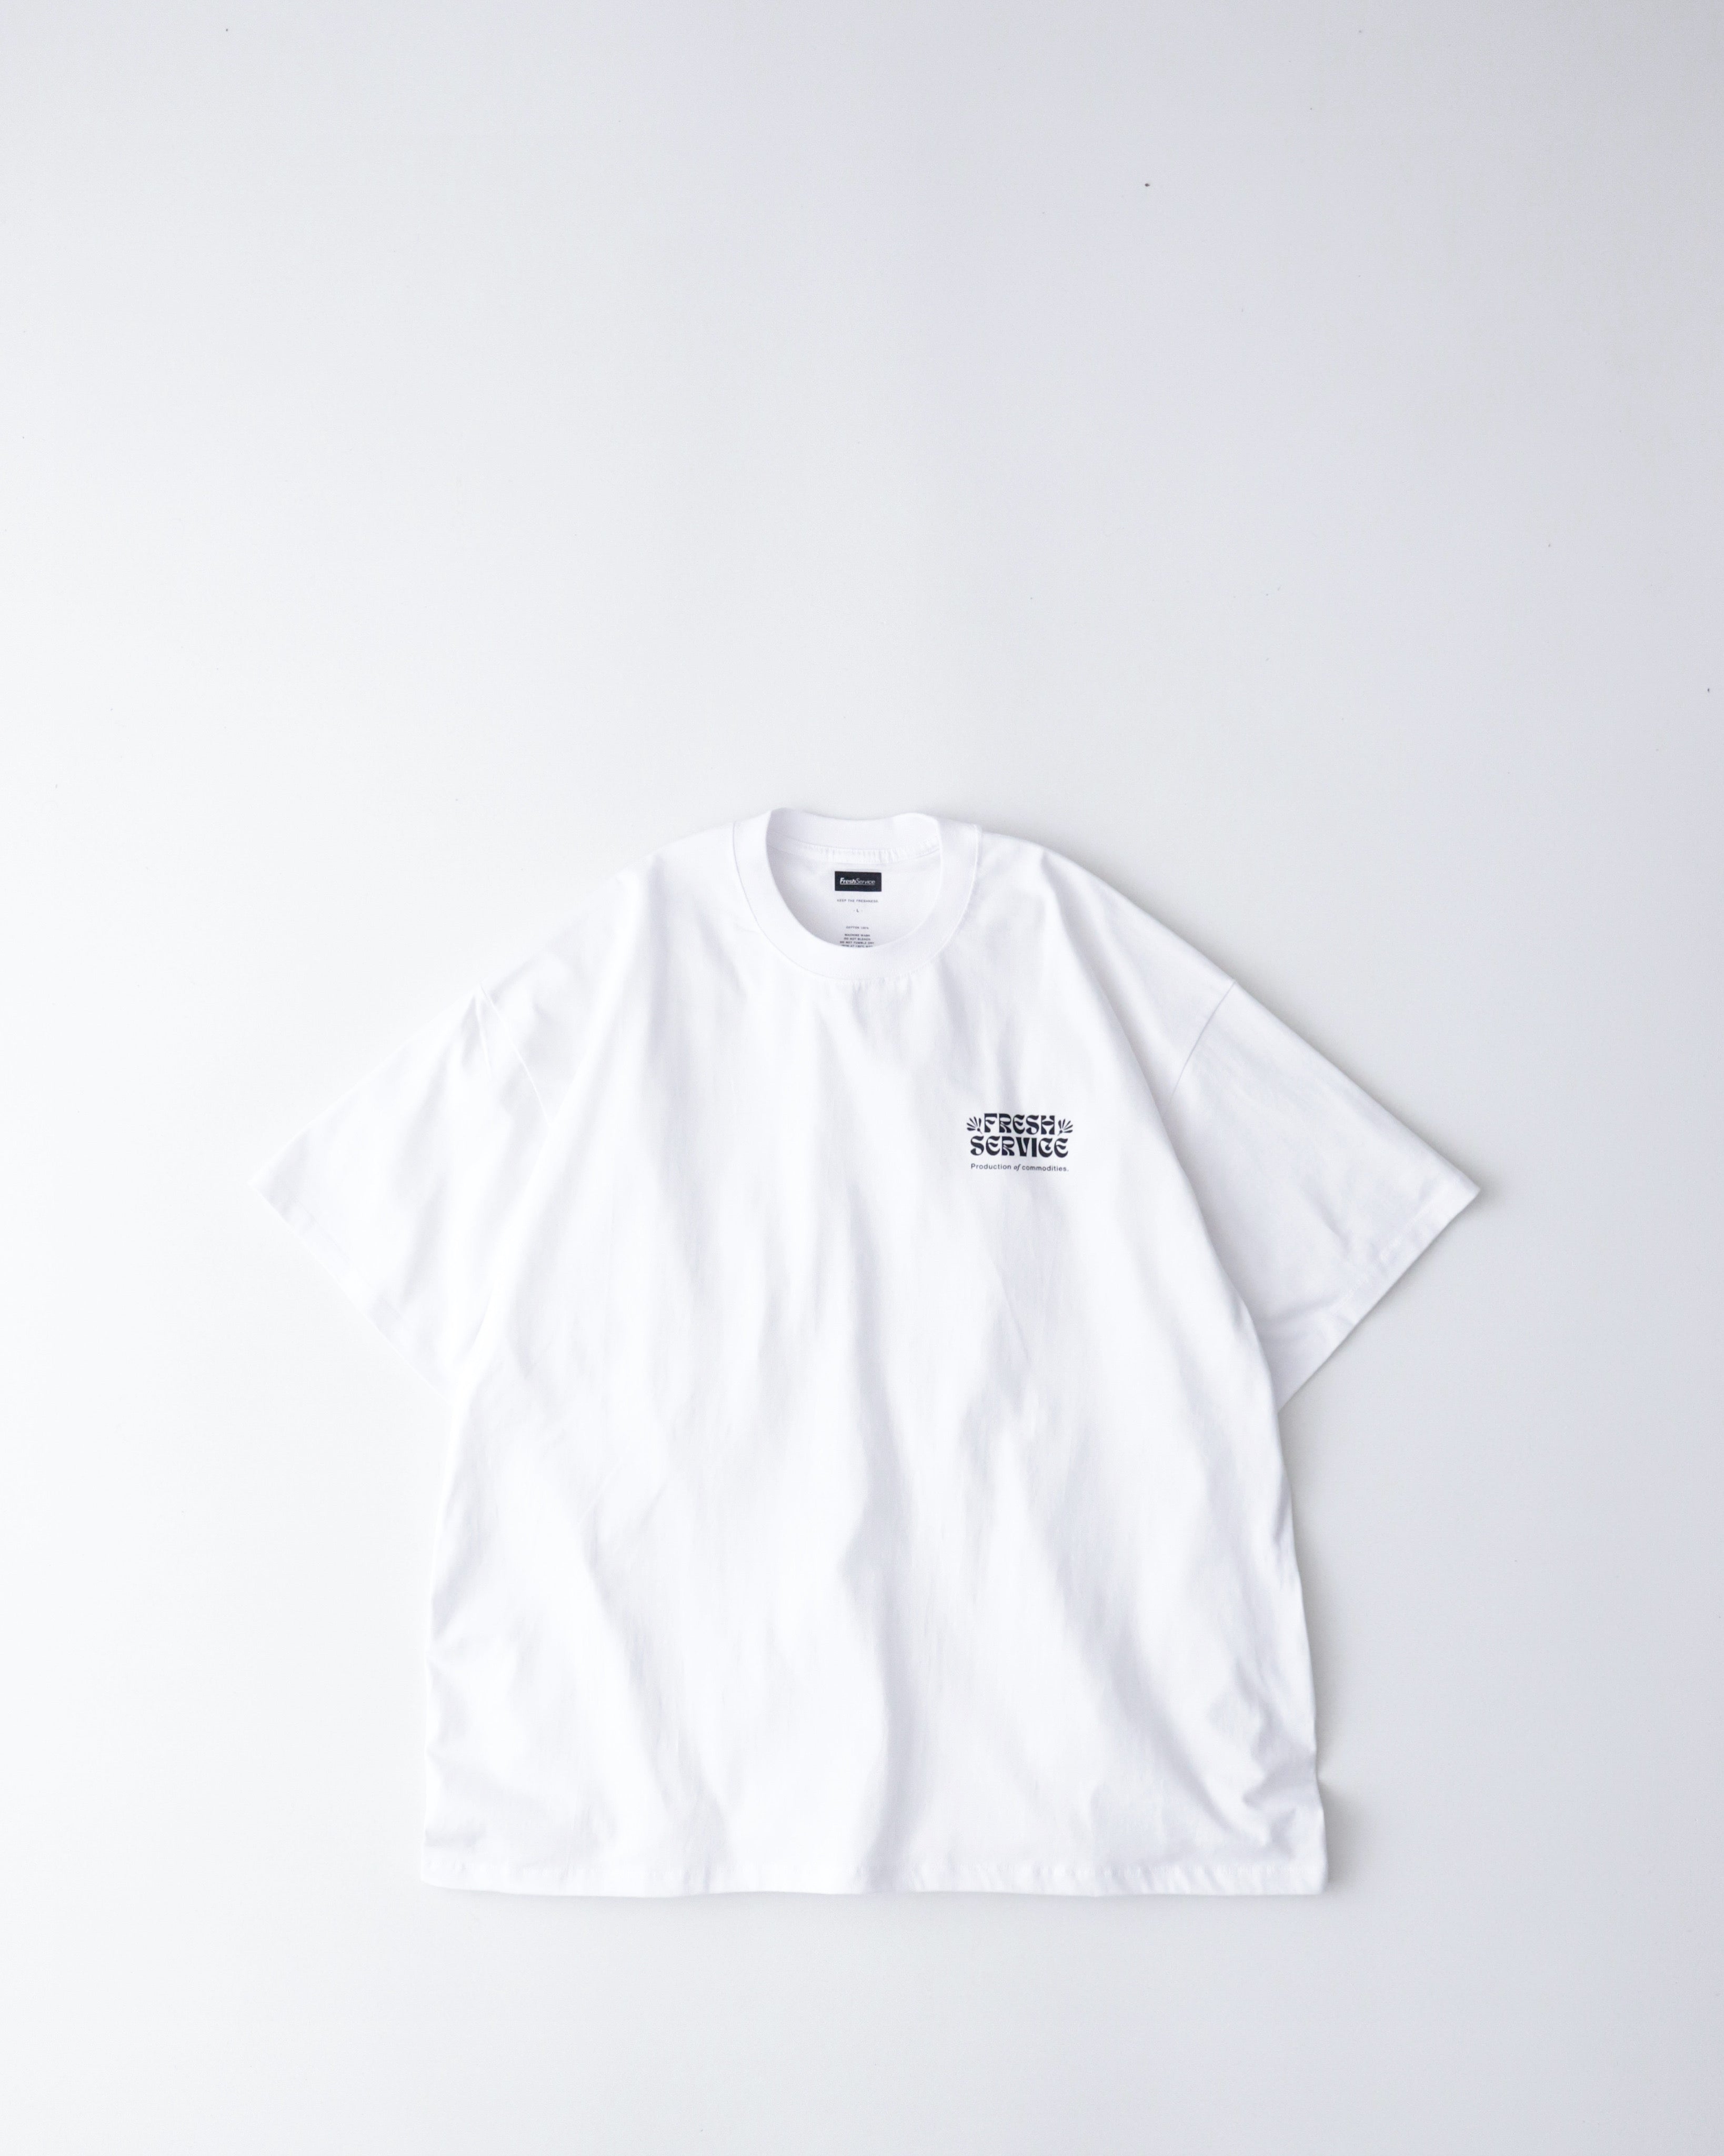 CORPORATE PRINTED S/S TEE ”ON LINES”